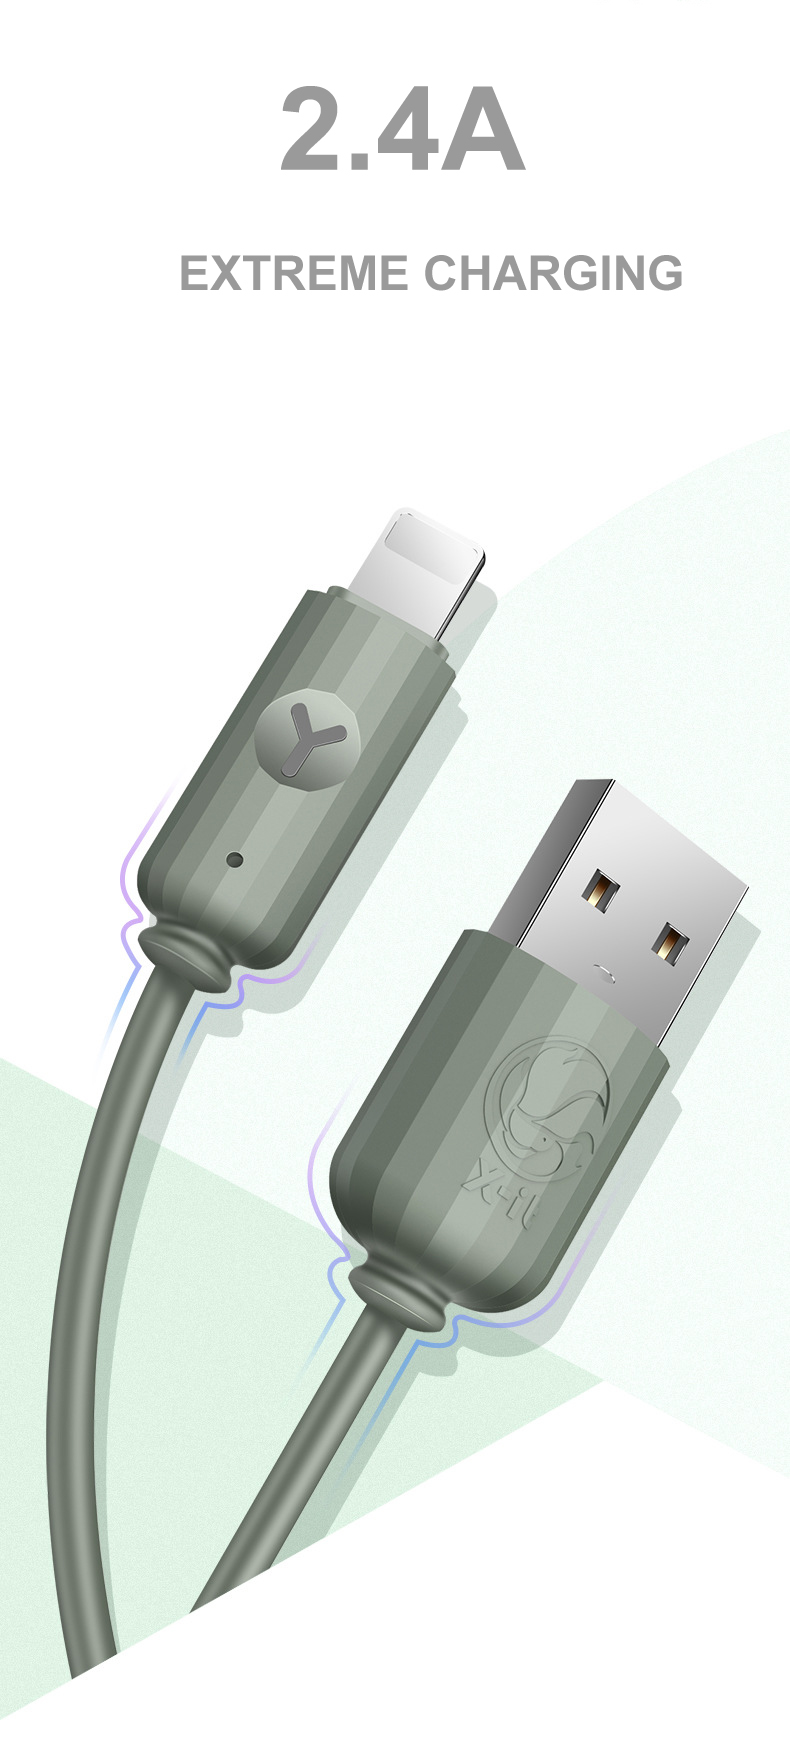 Bakeey 2.4A Micro USB Fast Charging Data Cable For OUKITEL Y4800 MI4 6Pro 7A